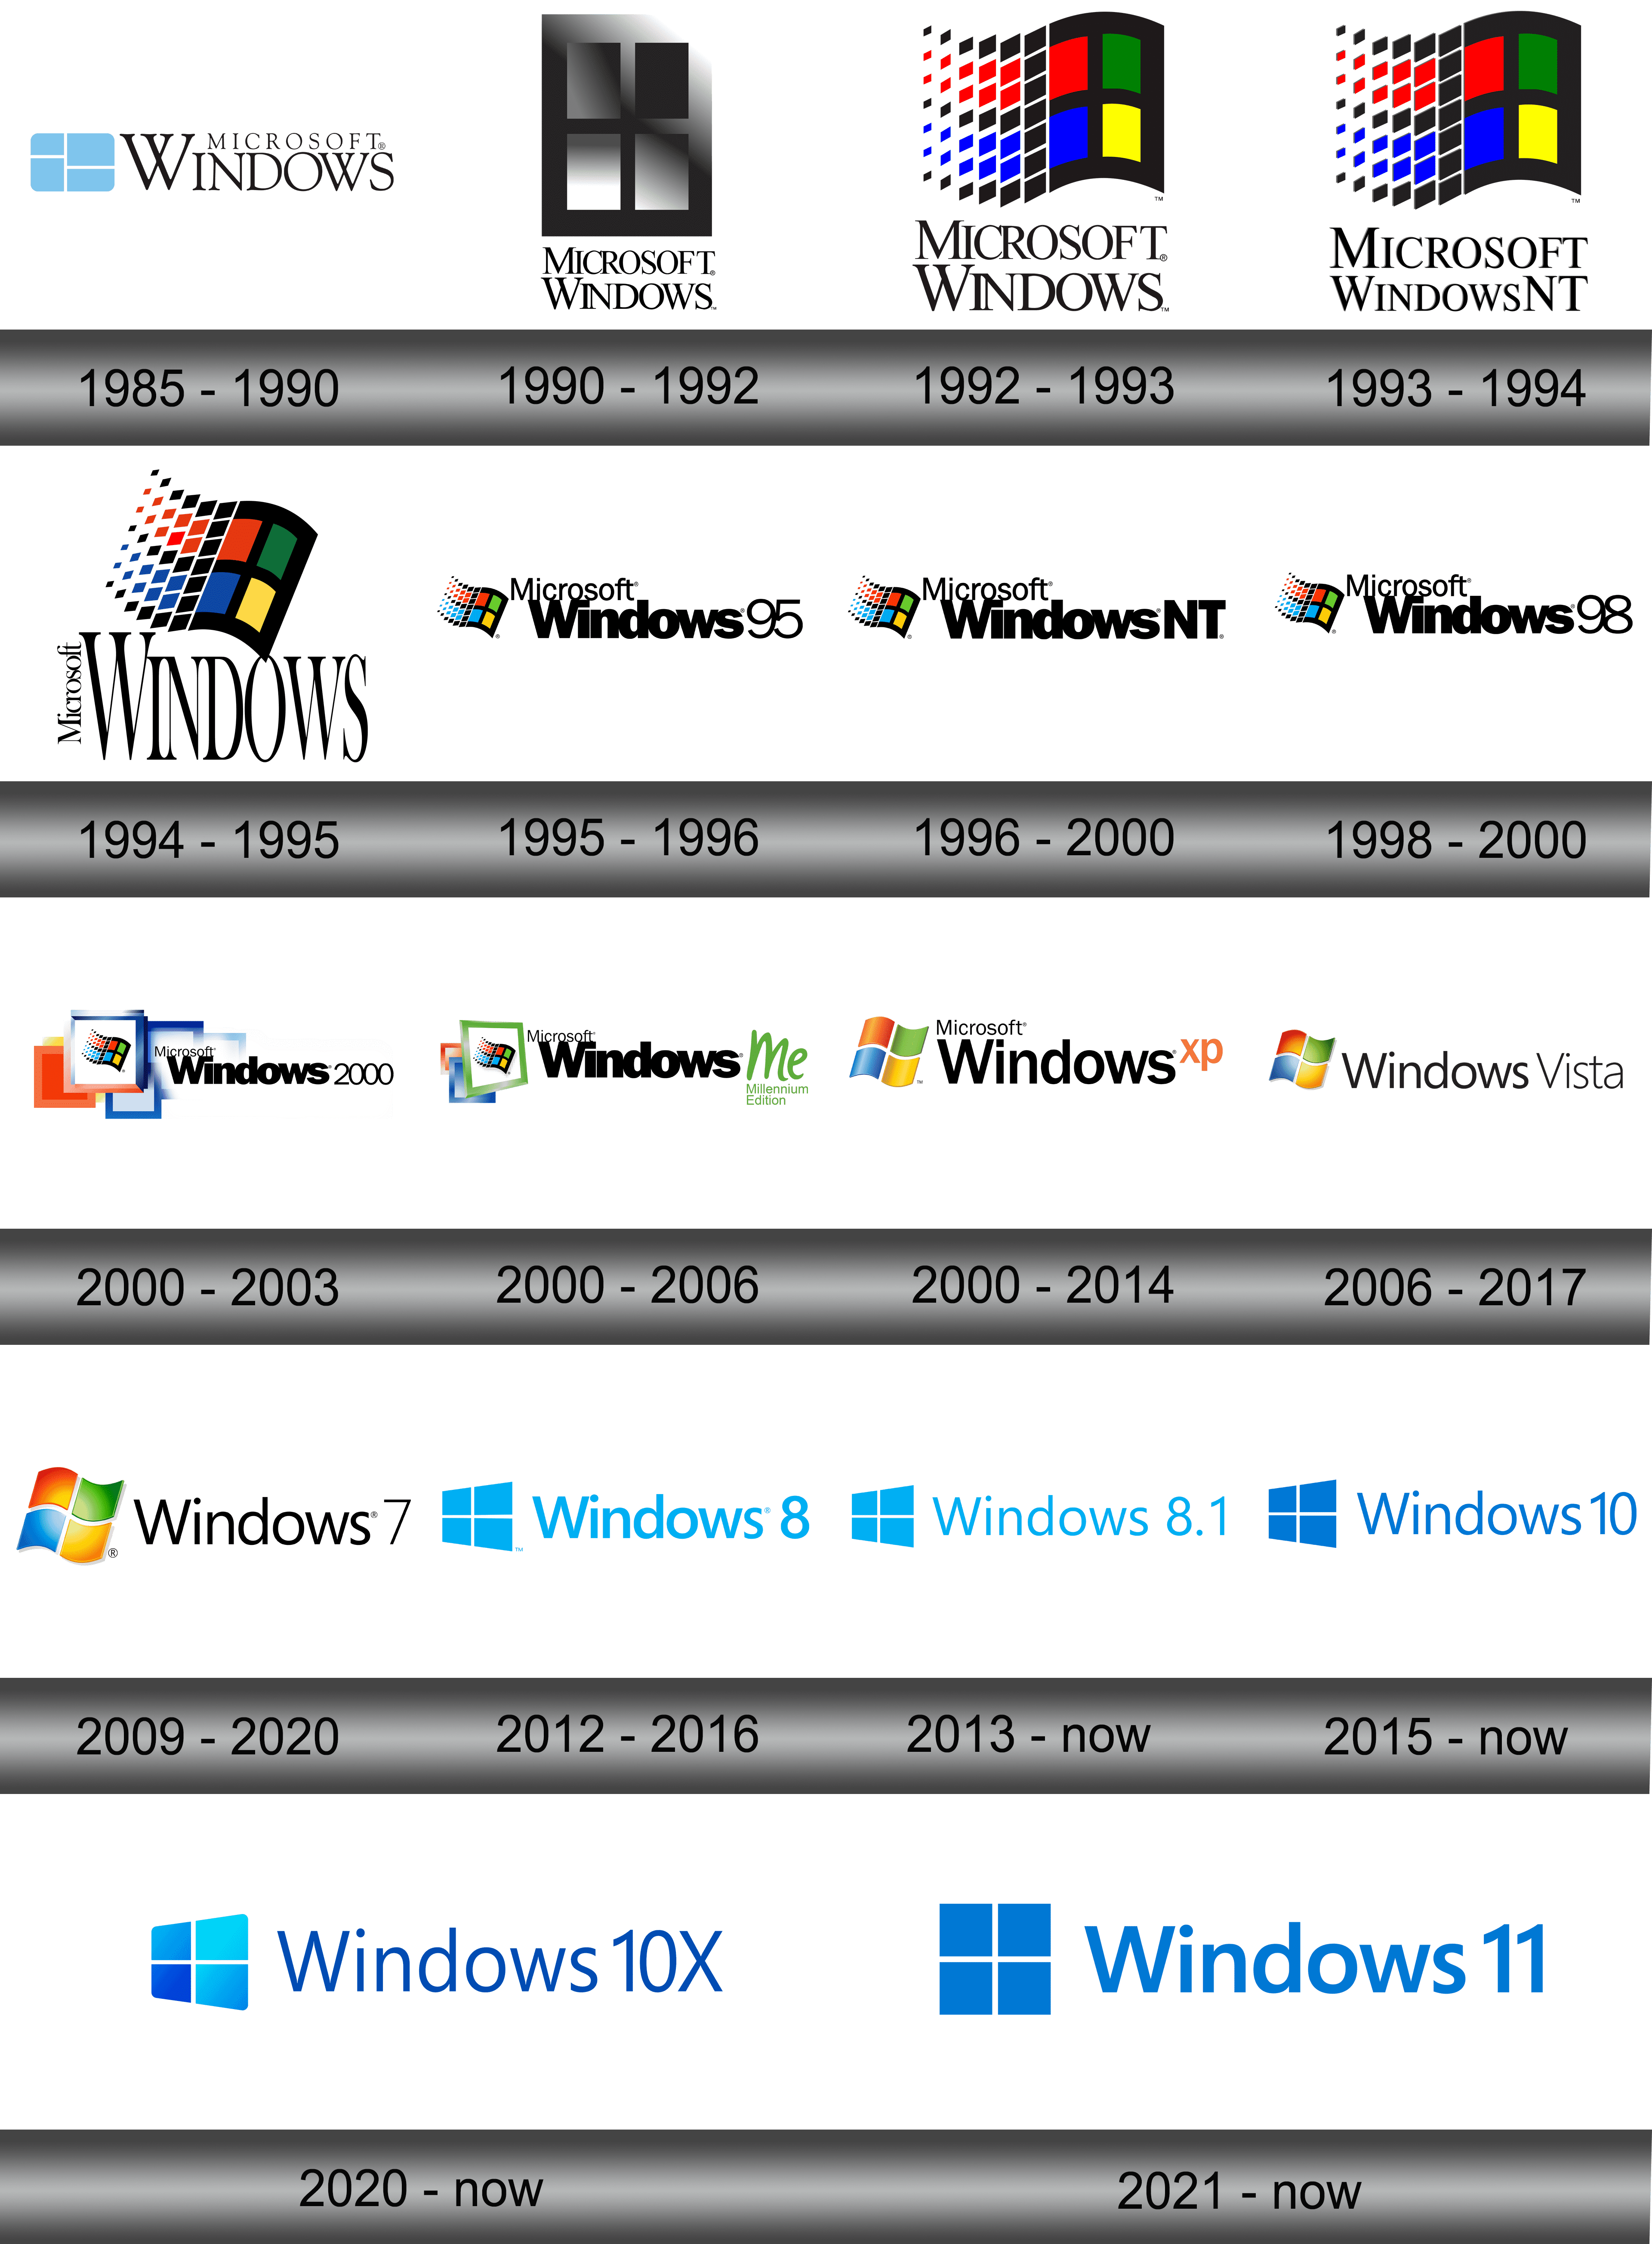 Windows Logo and symbol, meaning, history, sign.